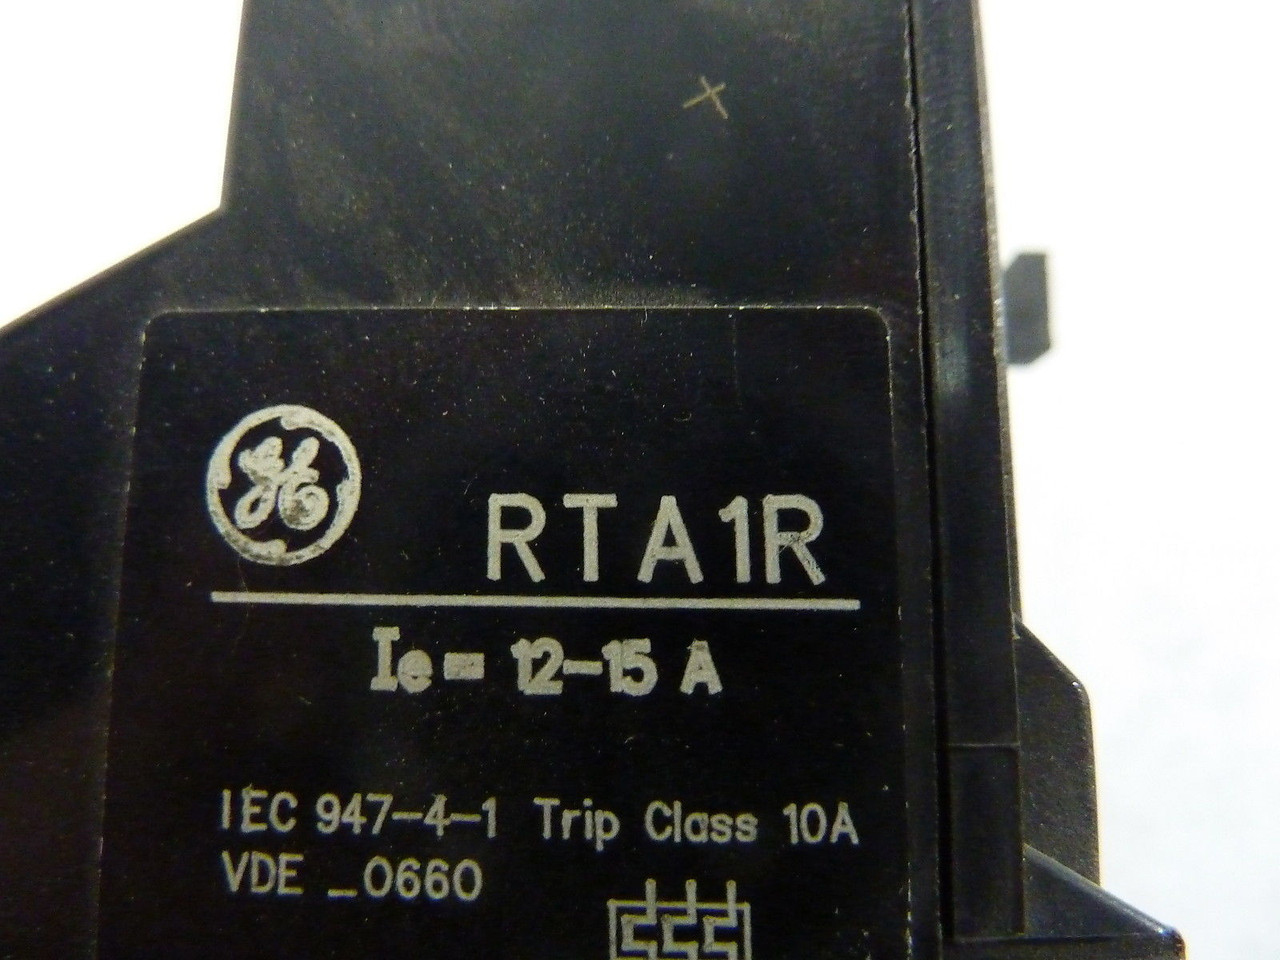 General Electric RTA1R Overload Relay 10-12A *Cosmetic Chips* USED